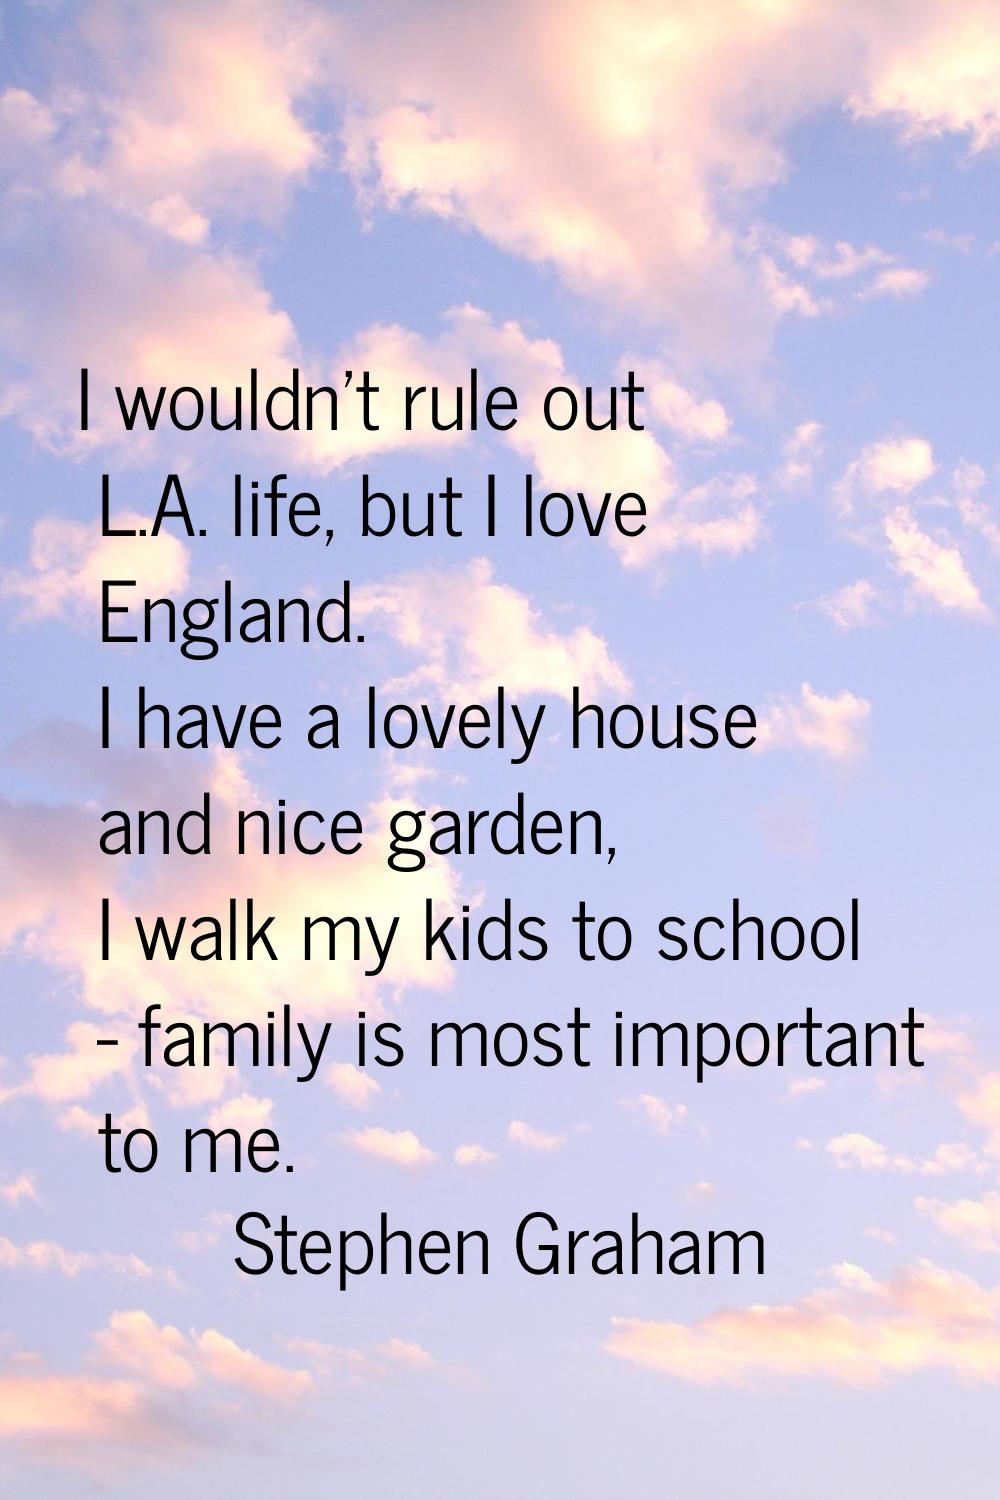 I wouldn't rule out L.A. life, but I love England. I have a lovely house and nice garden, I walk my